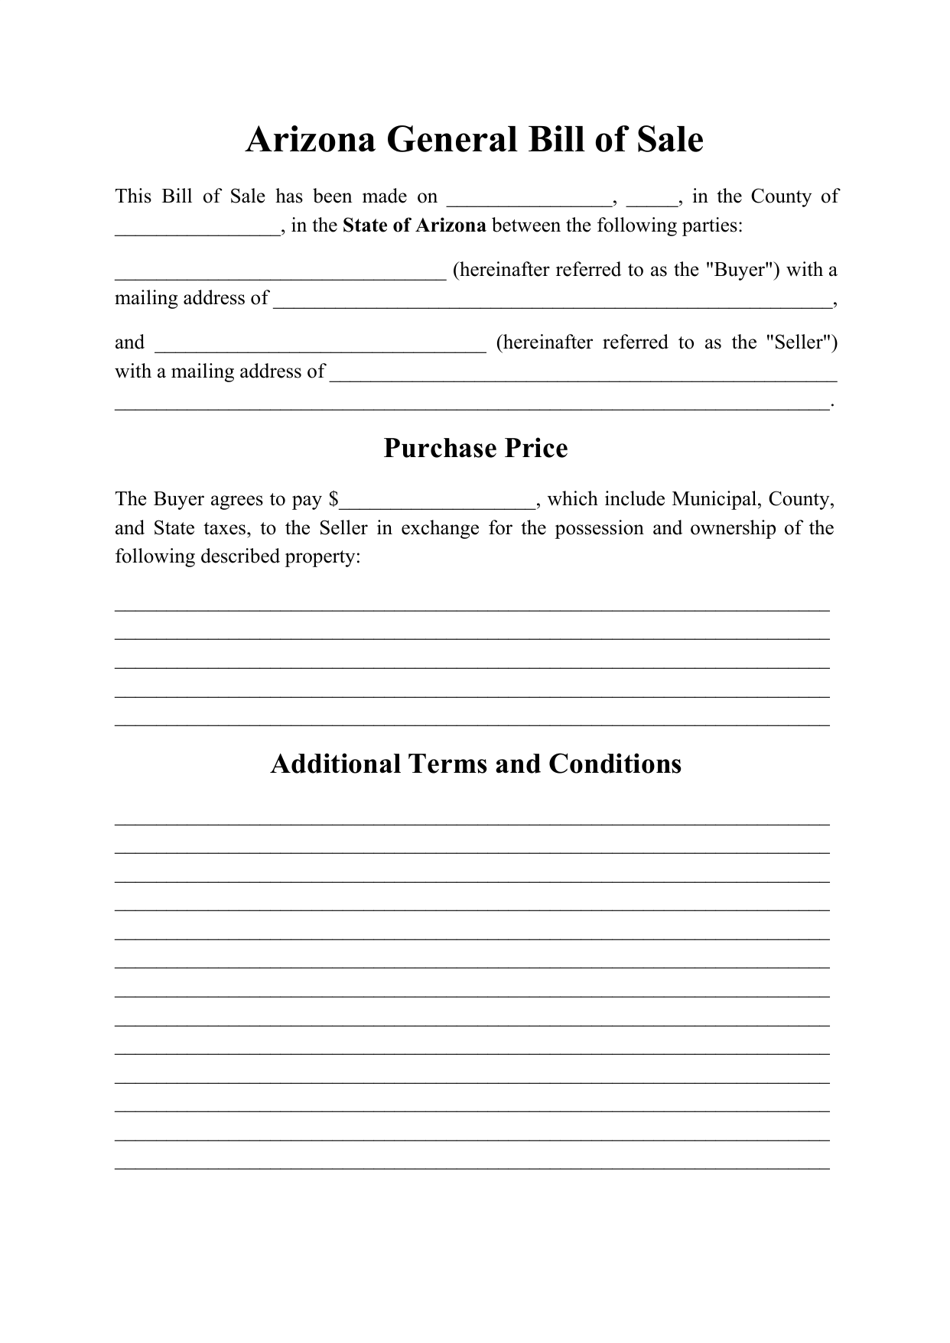 arizona-generic-bill-of-sale-form-fill-out-sign-online-and-download